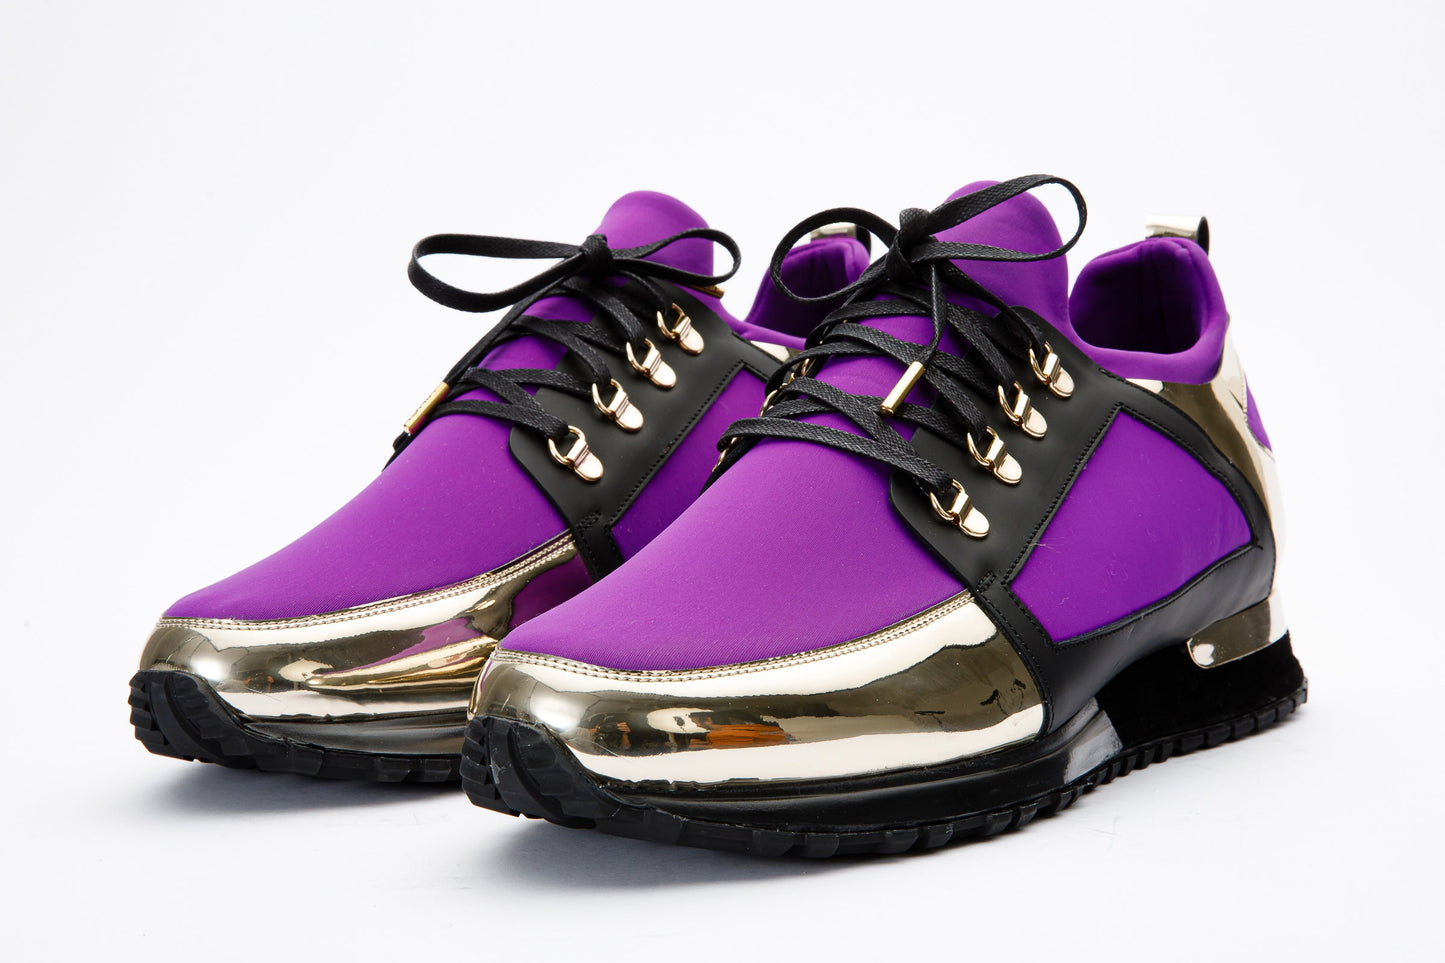 The Emir Purple Leather Women Sneaker Limited Edition